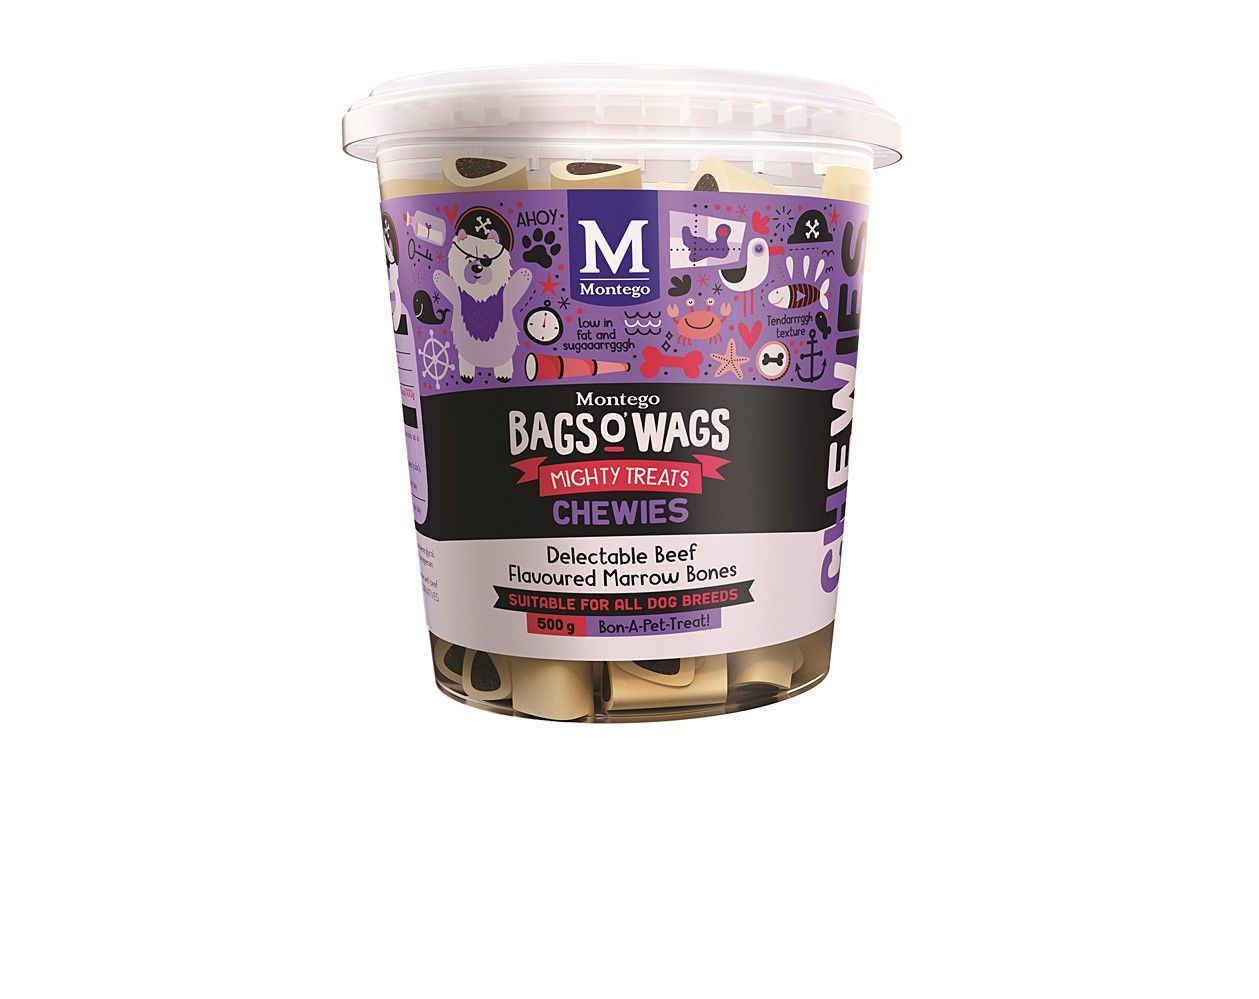 Snacking chien bœuf forme mœlle 500g Bags O Wags - MONTEGO